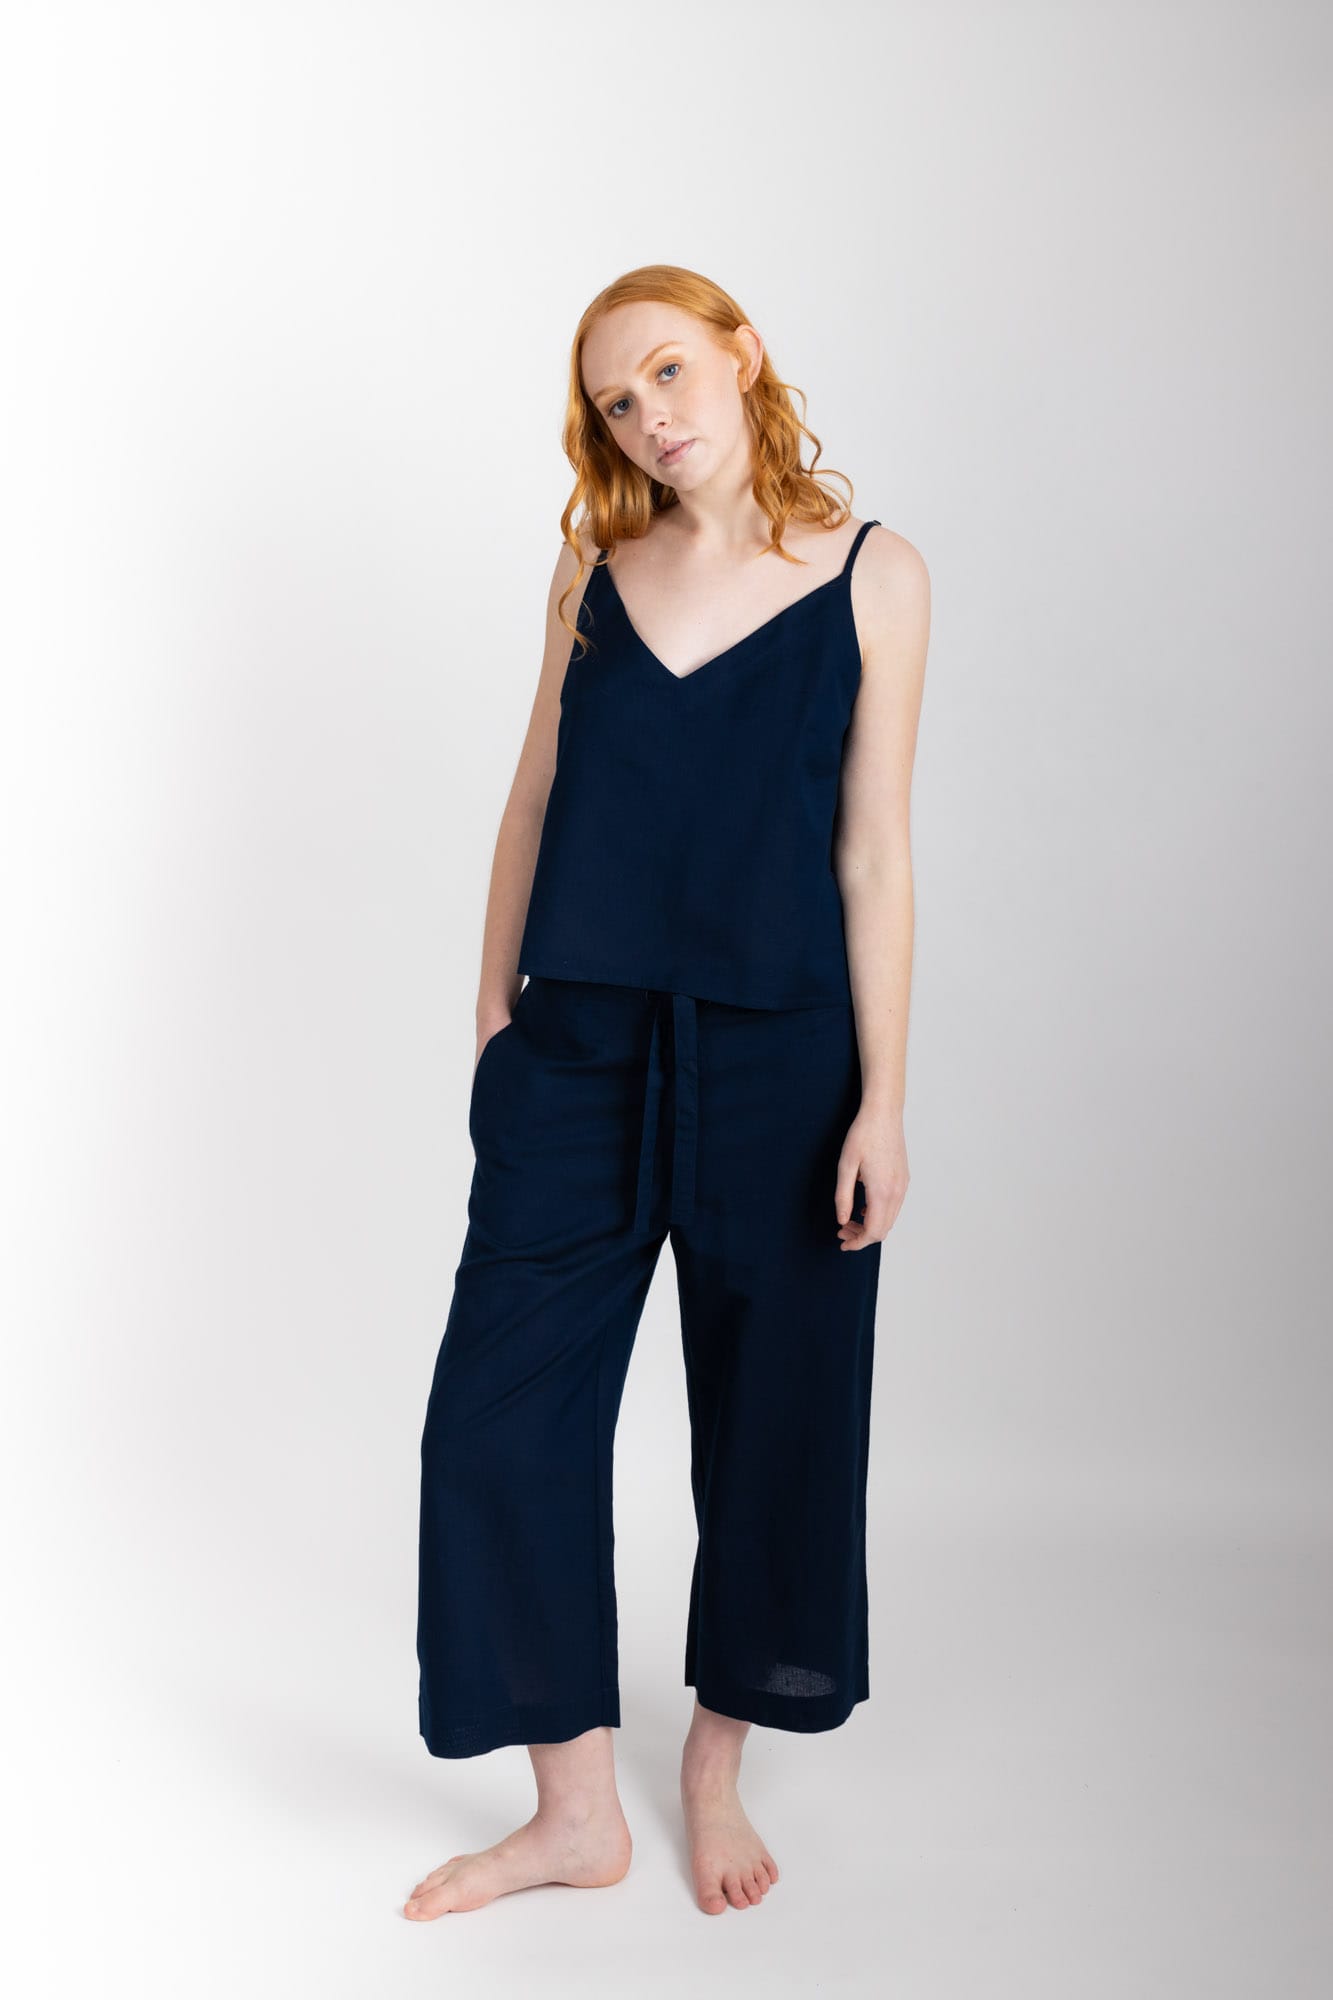 Women’s sleepwear set featuring a V-neck, swing-style camisole with adjustable straps. Paired with straight-leg cropped pant with an elasticated waist, flat front, and drawstring detail, these pants are comfortable and flattering. Woven in 100% organic cotton, both pieces have been finished with French seams.